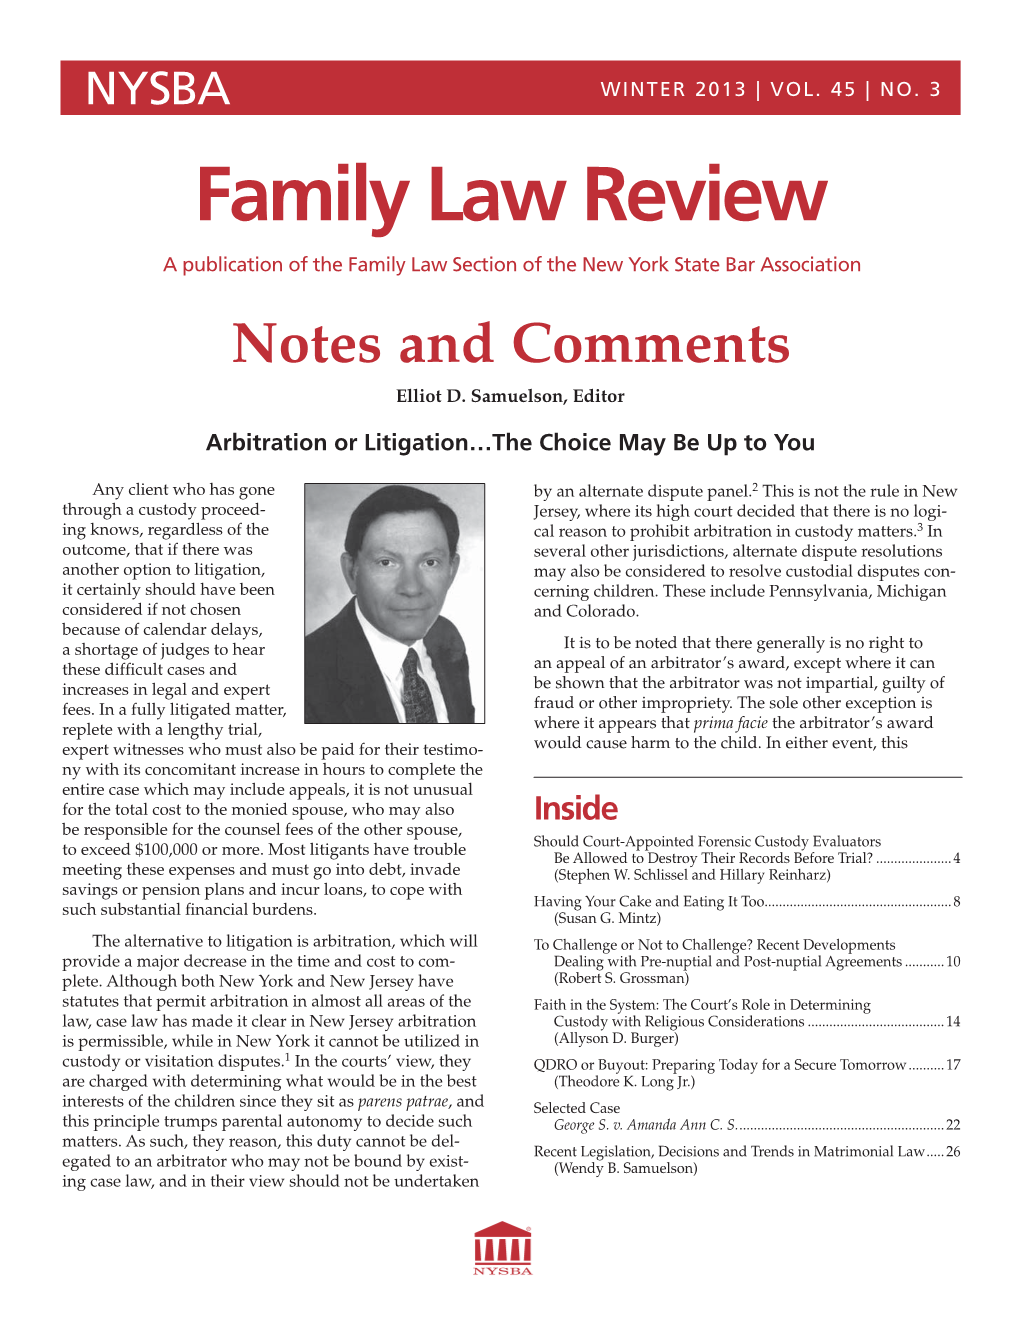 Family Law Review a Publication of the Family Law Section of the New York State Bar Association Notes and Comments Elliot D